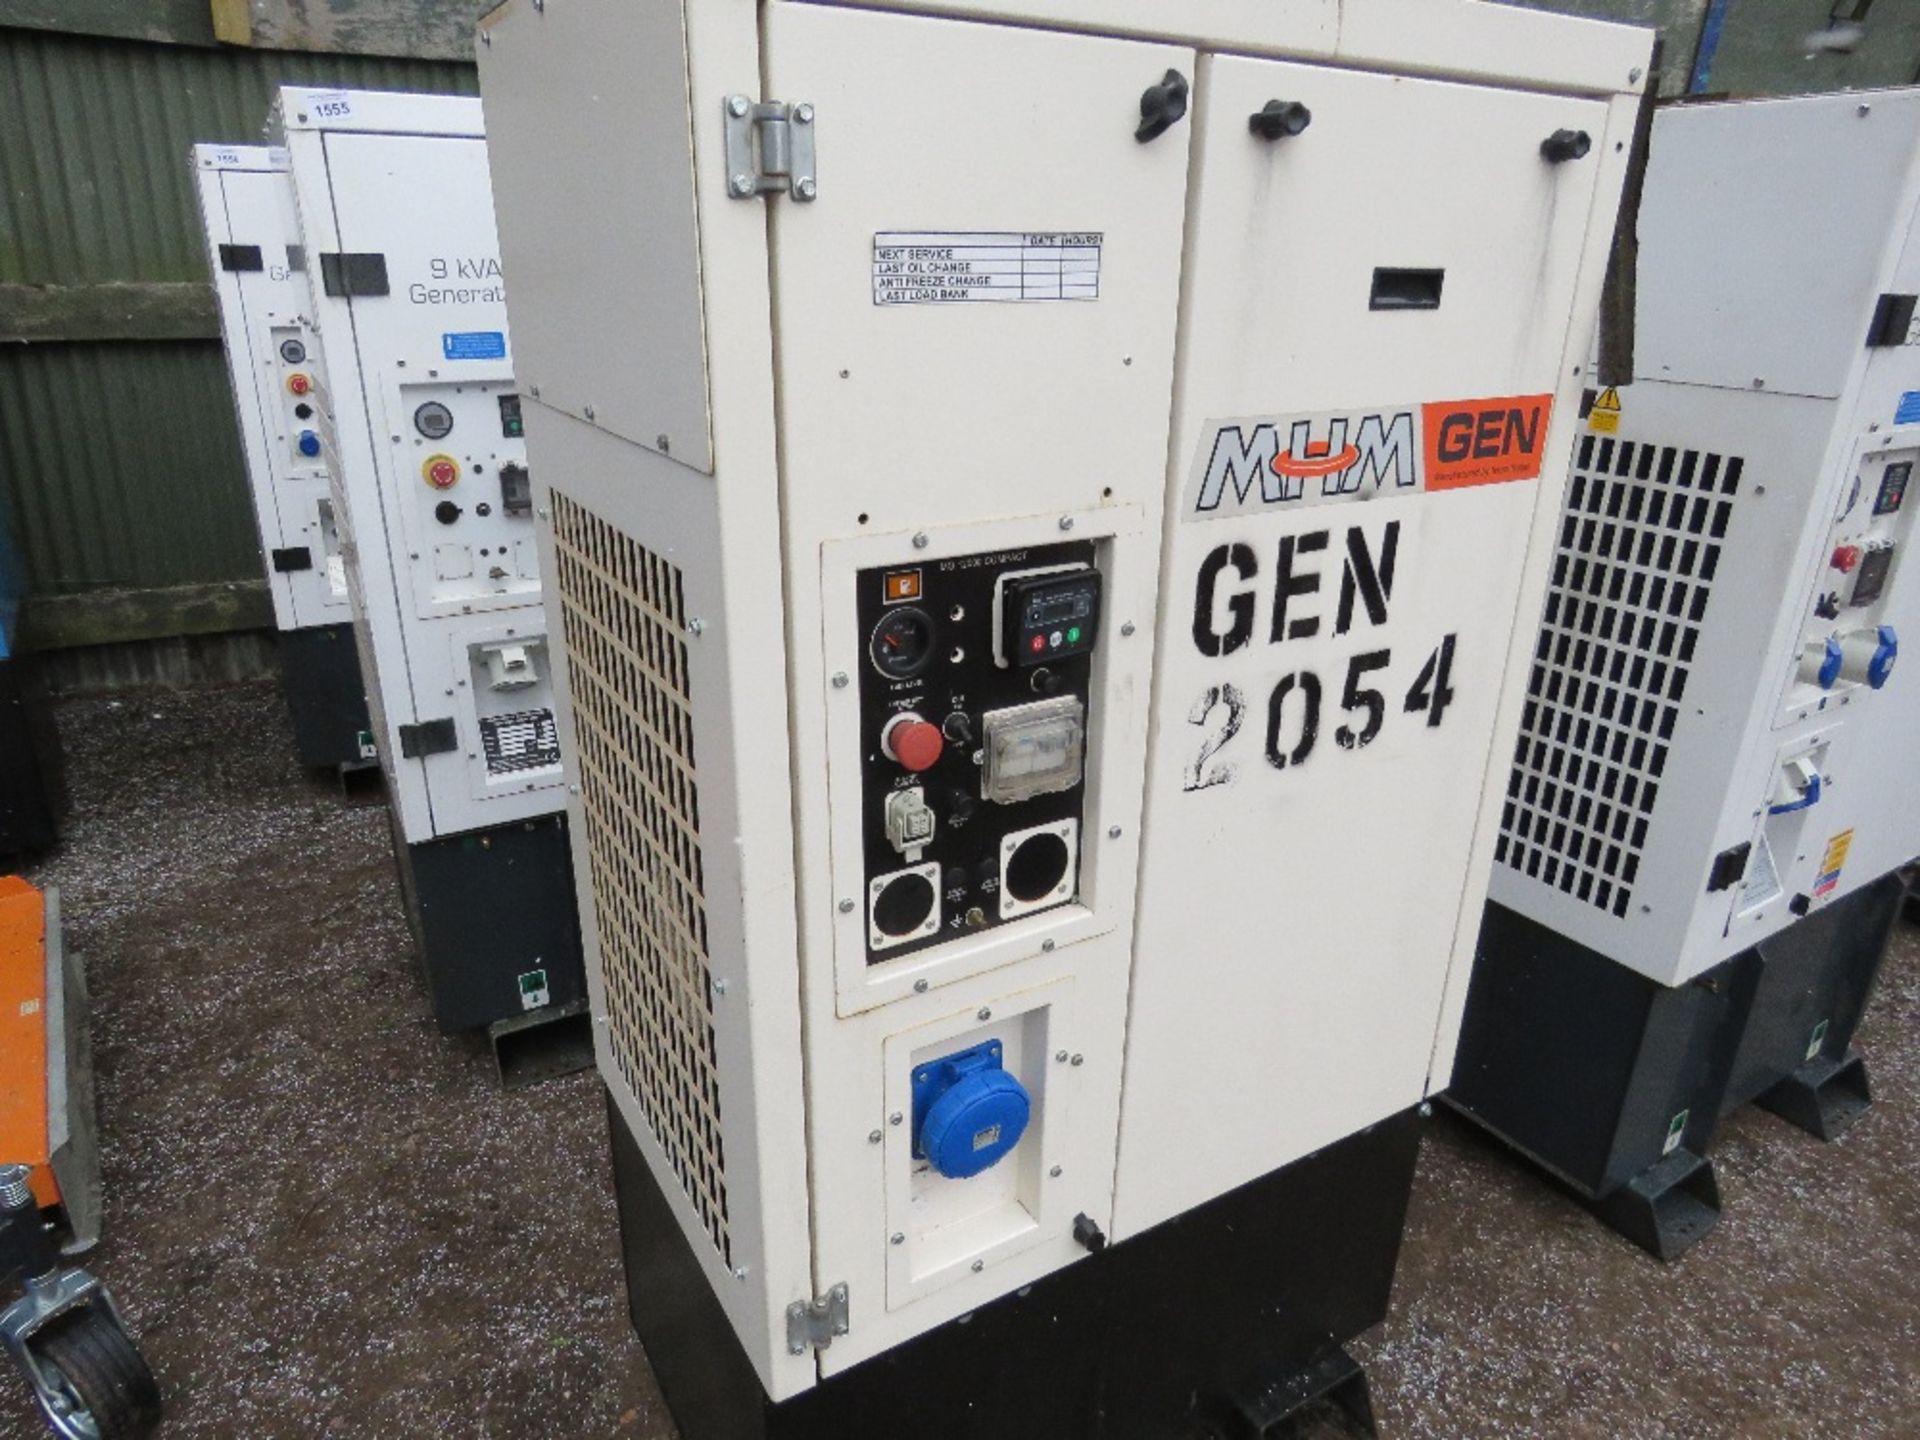 MHM MG1200 COMPACT GENERATOR SET, KUBOTA 3 CYLINDER DIESEL ENGINE. PREVIOUSLY USED FOR POWERING WELF